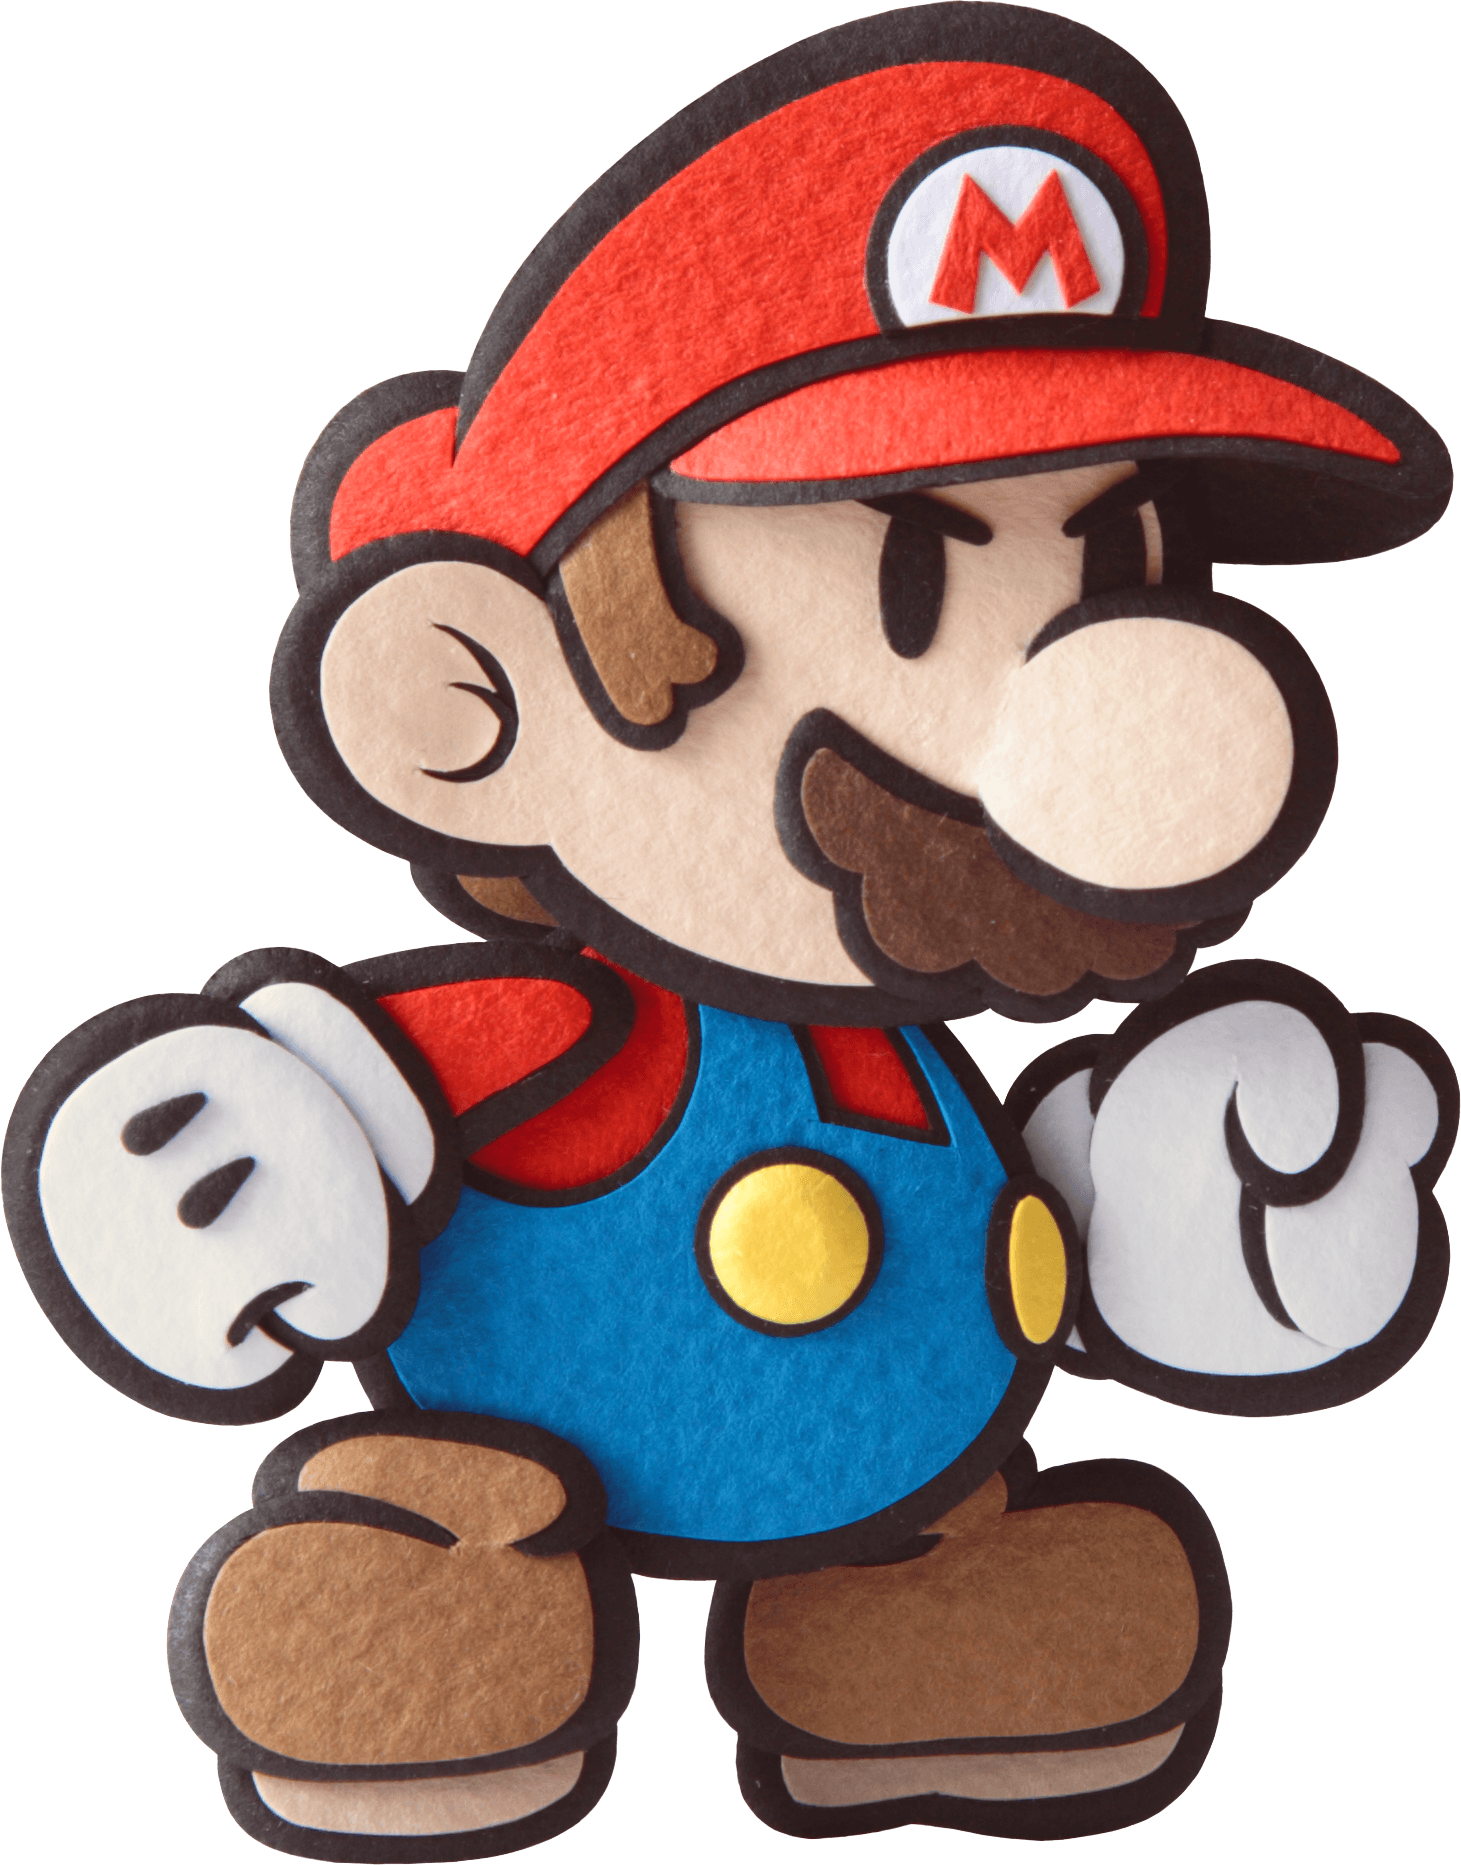 Paper Mario looking serious with a clenched fist. 